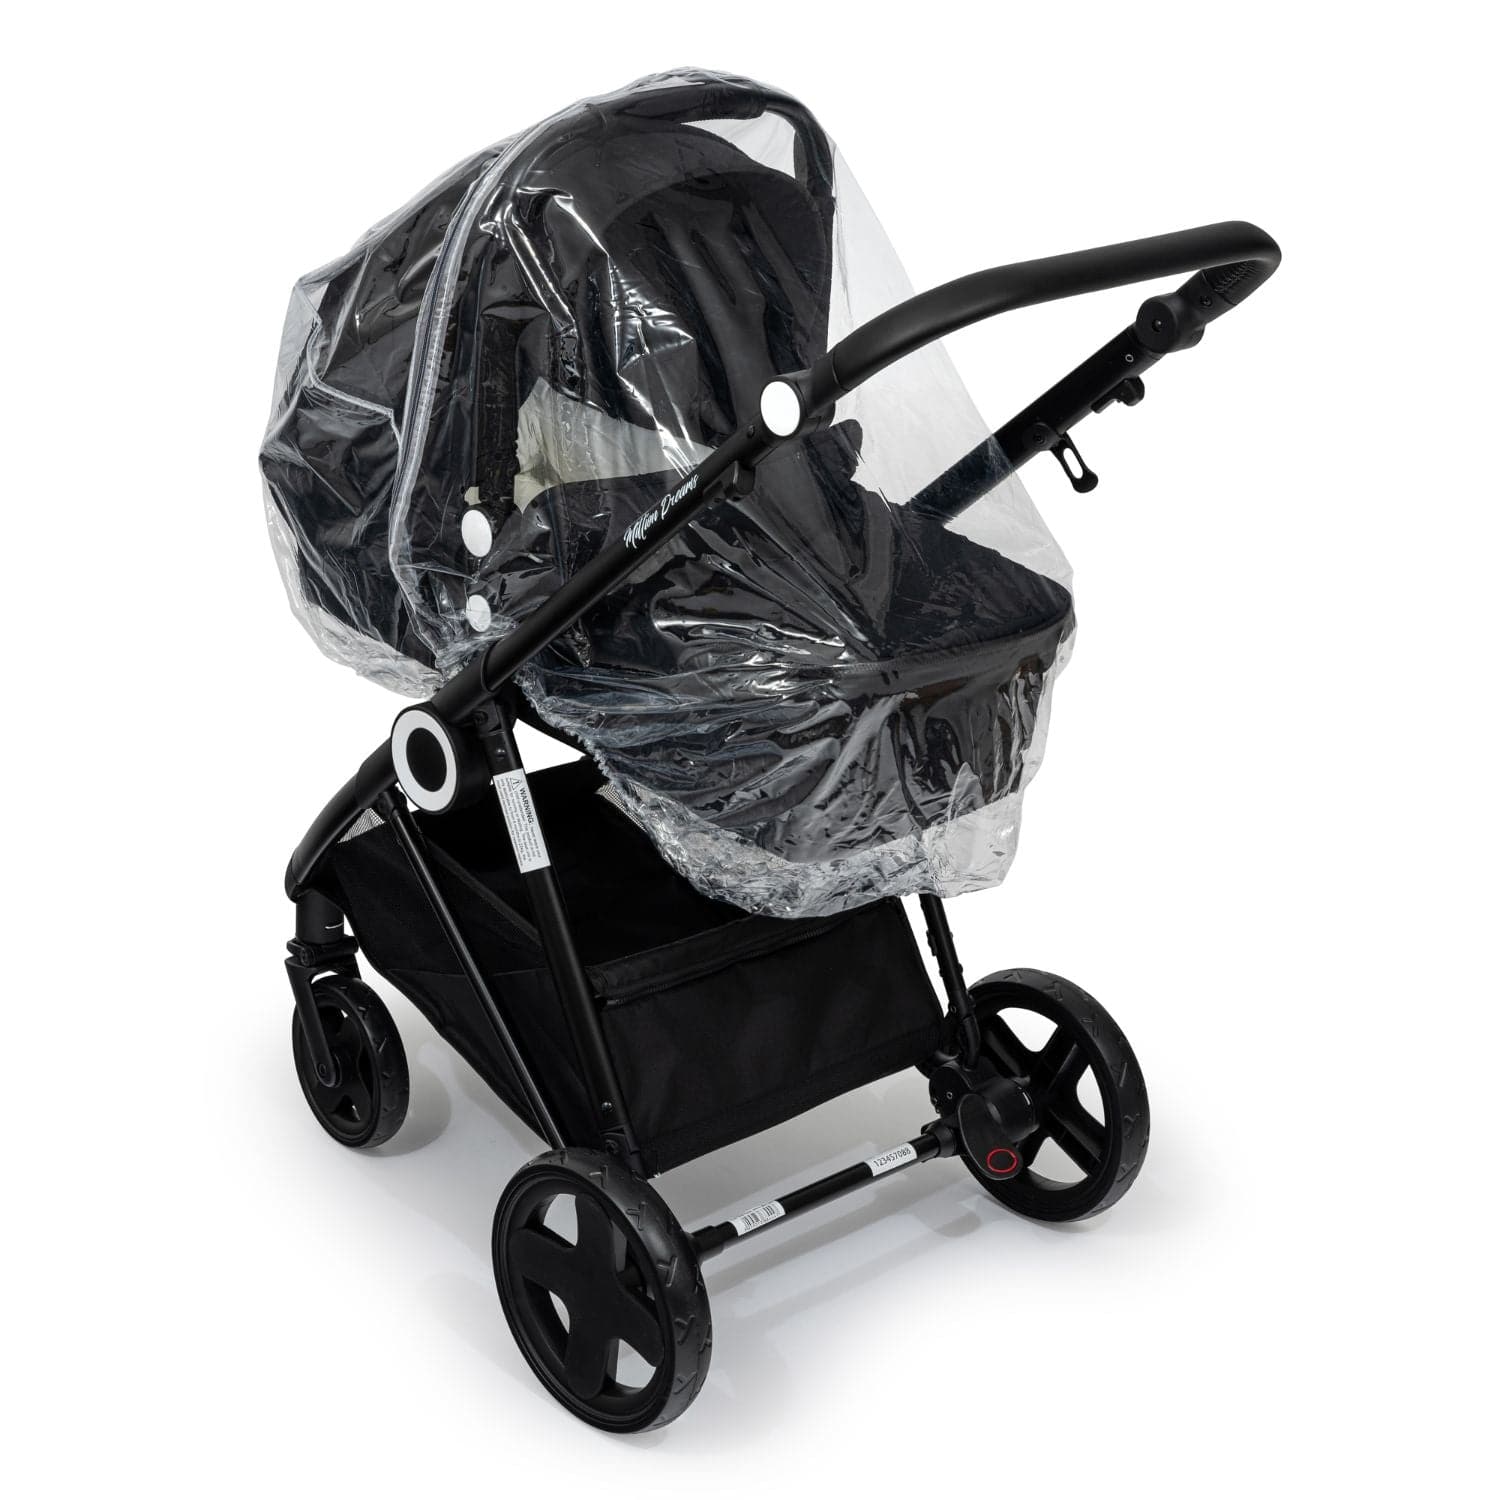 Carrycot Raincover Compatible With Esprit - Fits All Models - For Your Little One